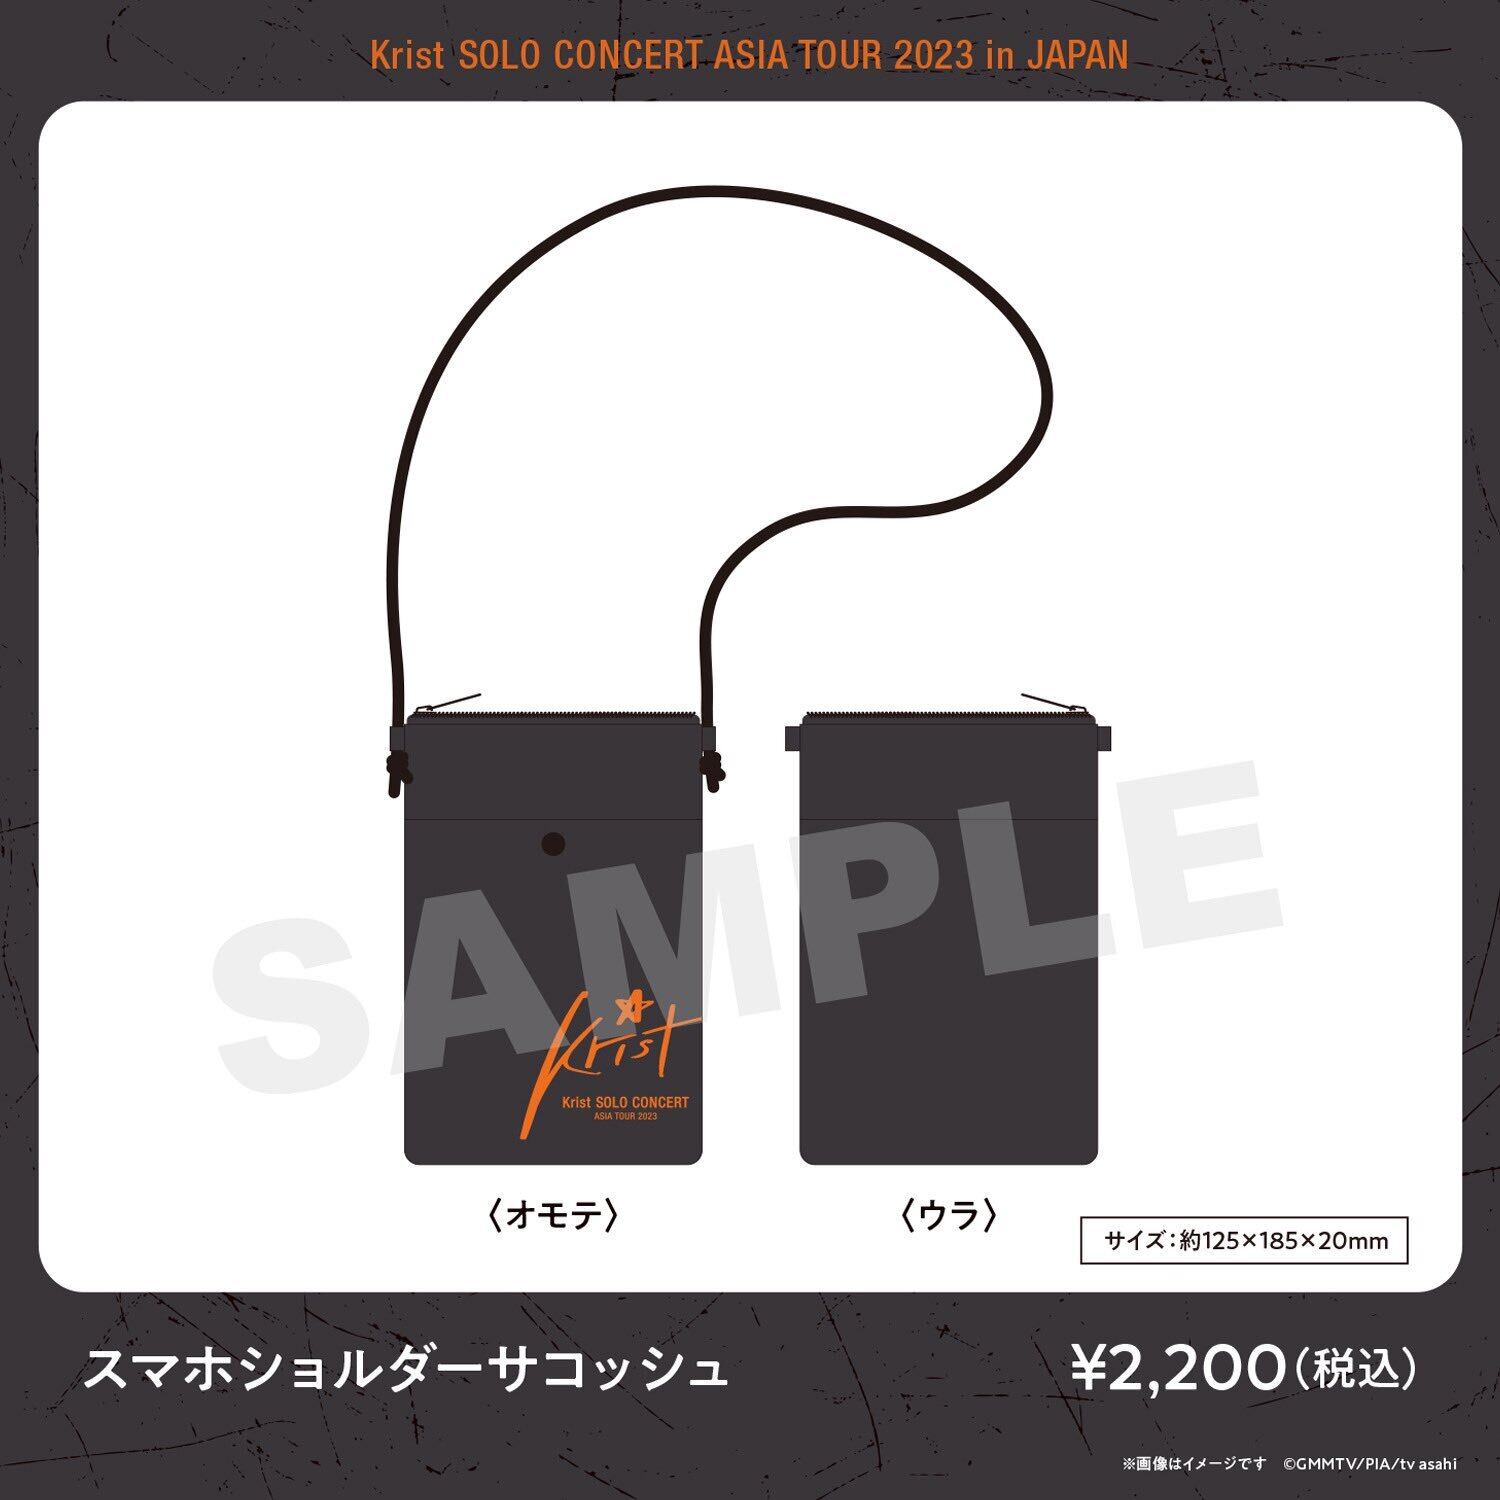 Krist Solo Concert Asia Tour 2023 in JAPAN GOODS STORE